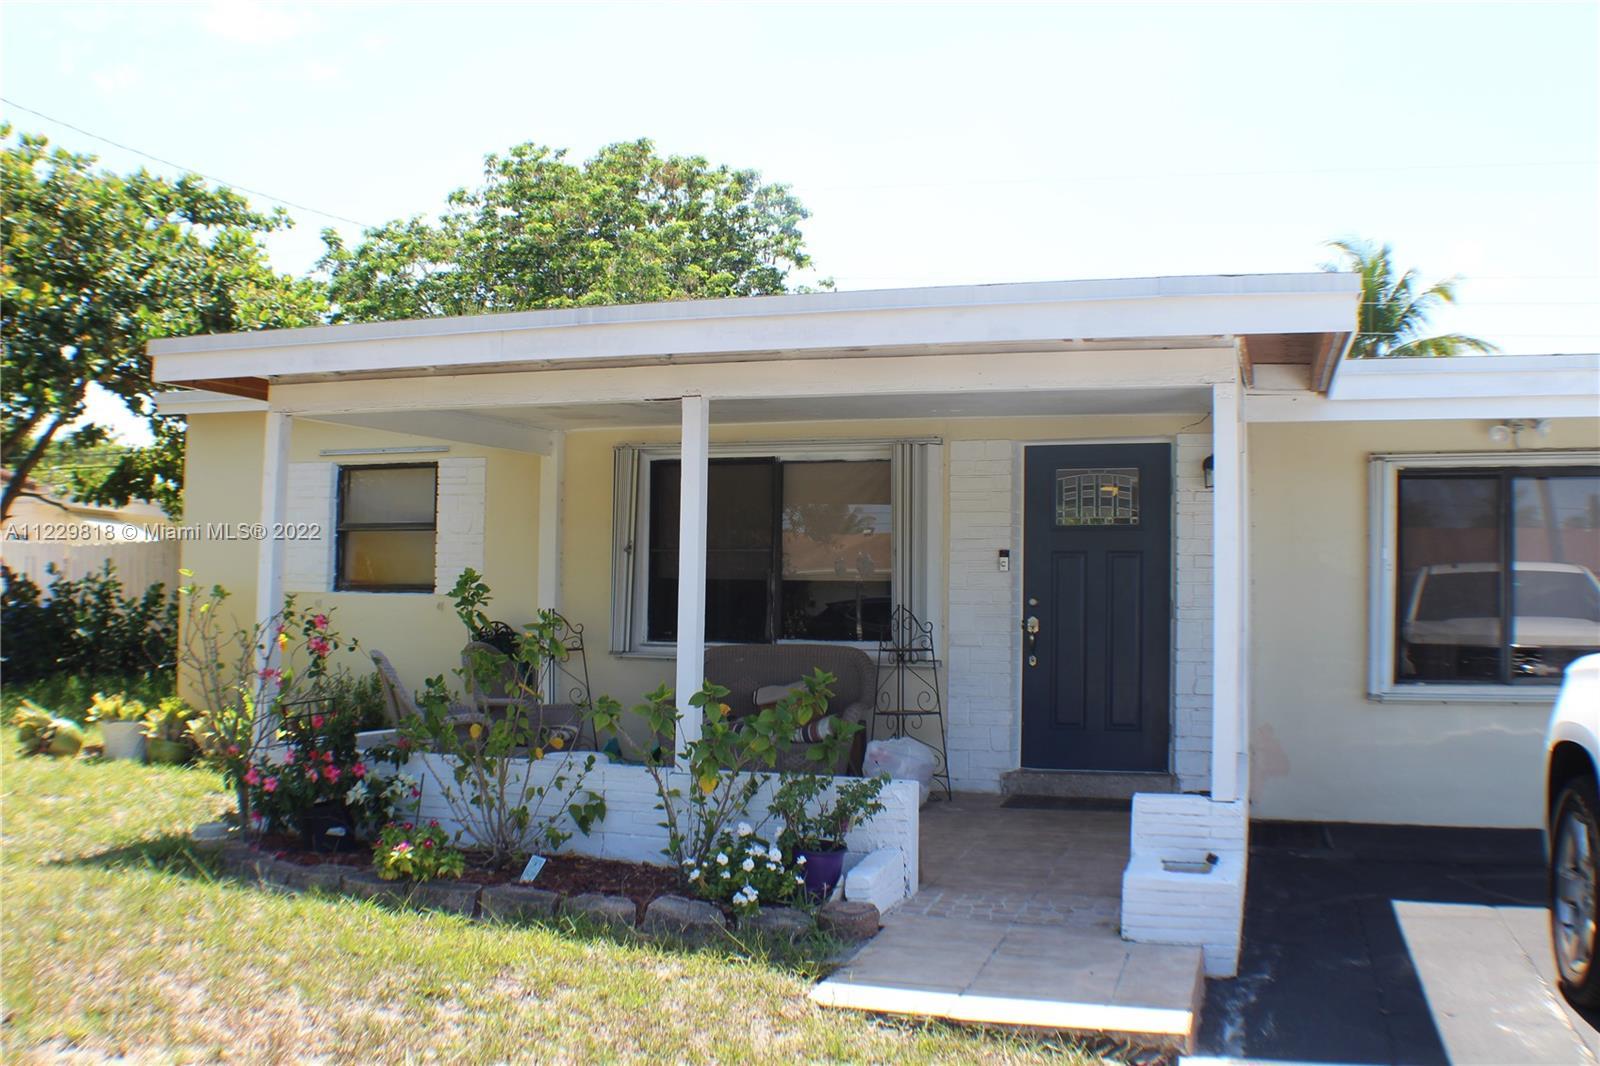 Charming home in nice quiet neighborhood! Enjoy sitting on the front porch. Light kitchen cabinets a